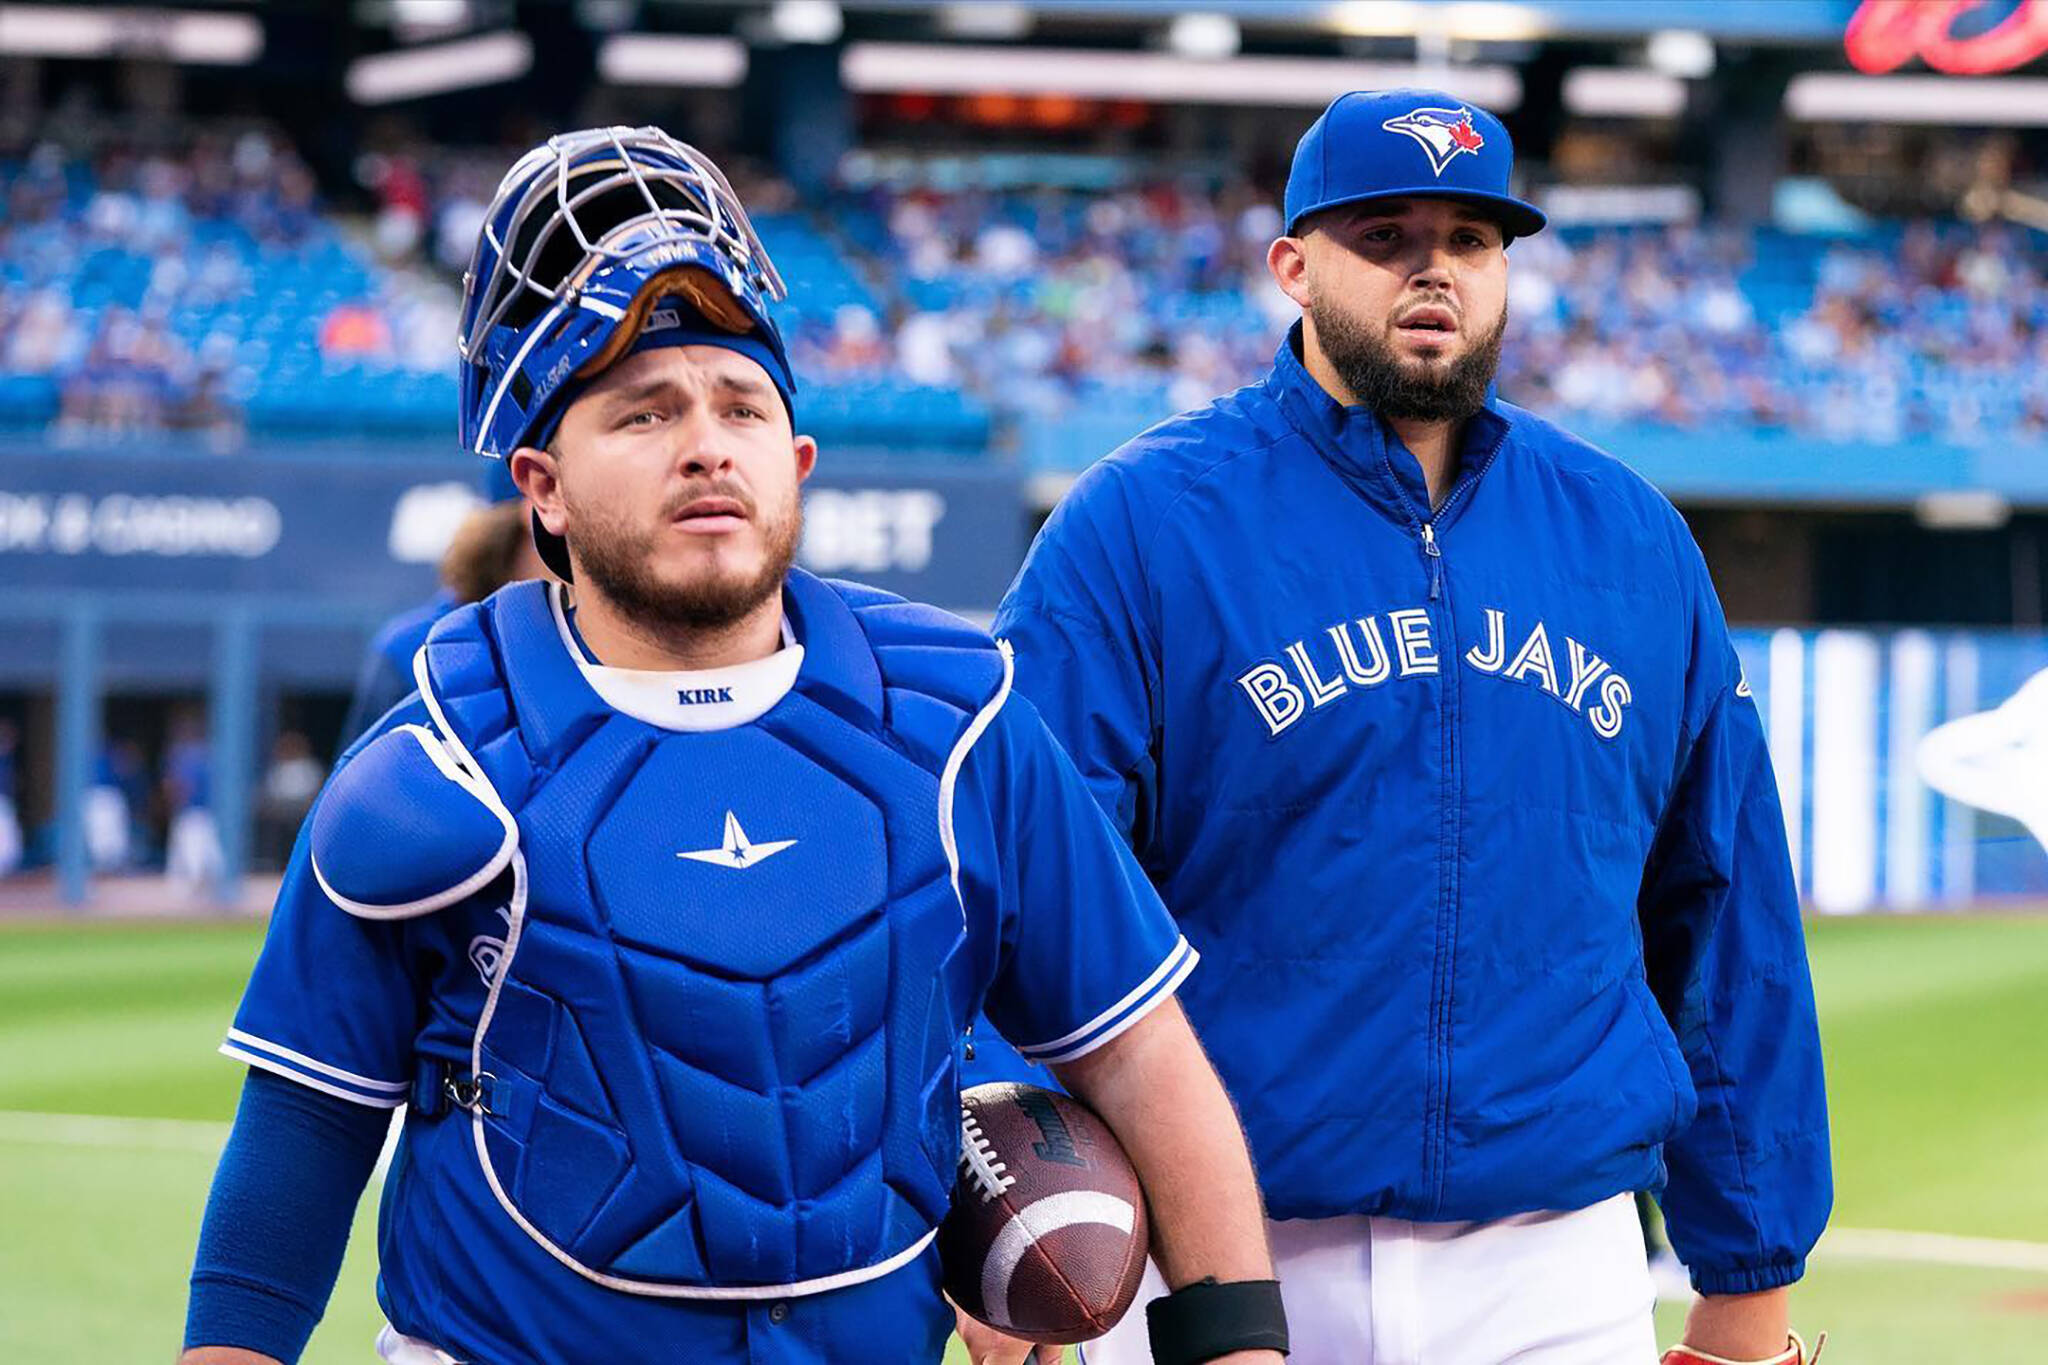 Montreal sports host apologizes for 'insensitive' tweet about Blue Jays  catcher Kirk